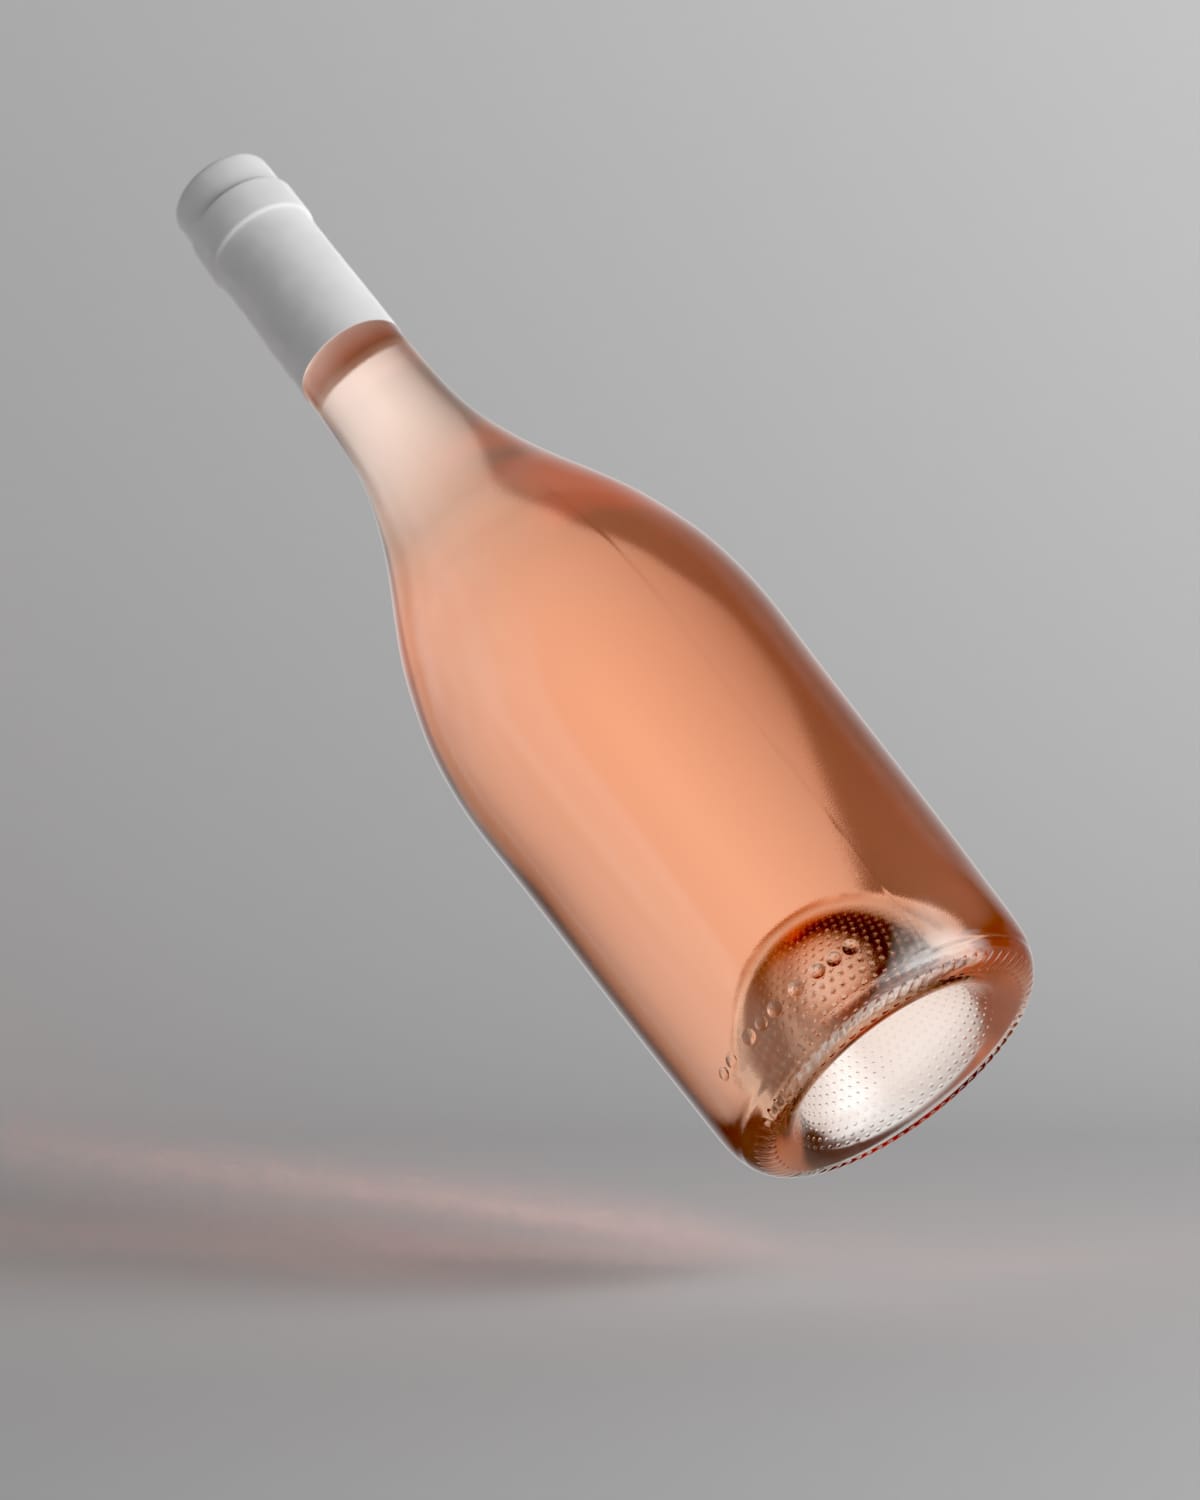 A bottle of rose wine on a grey background